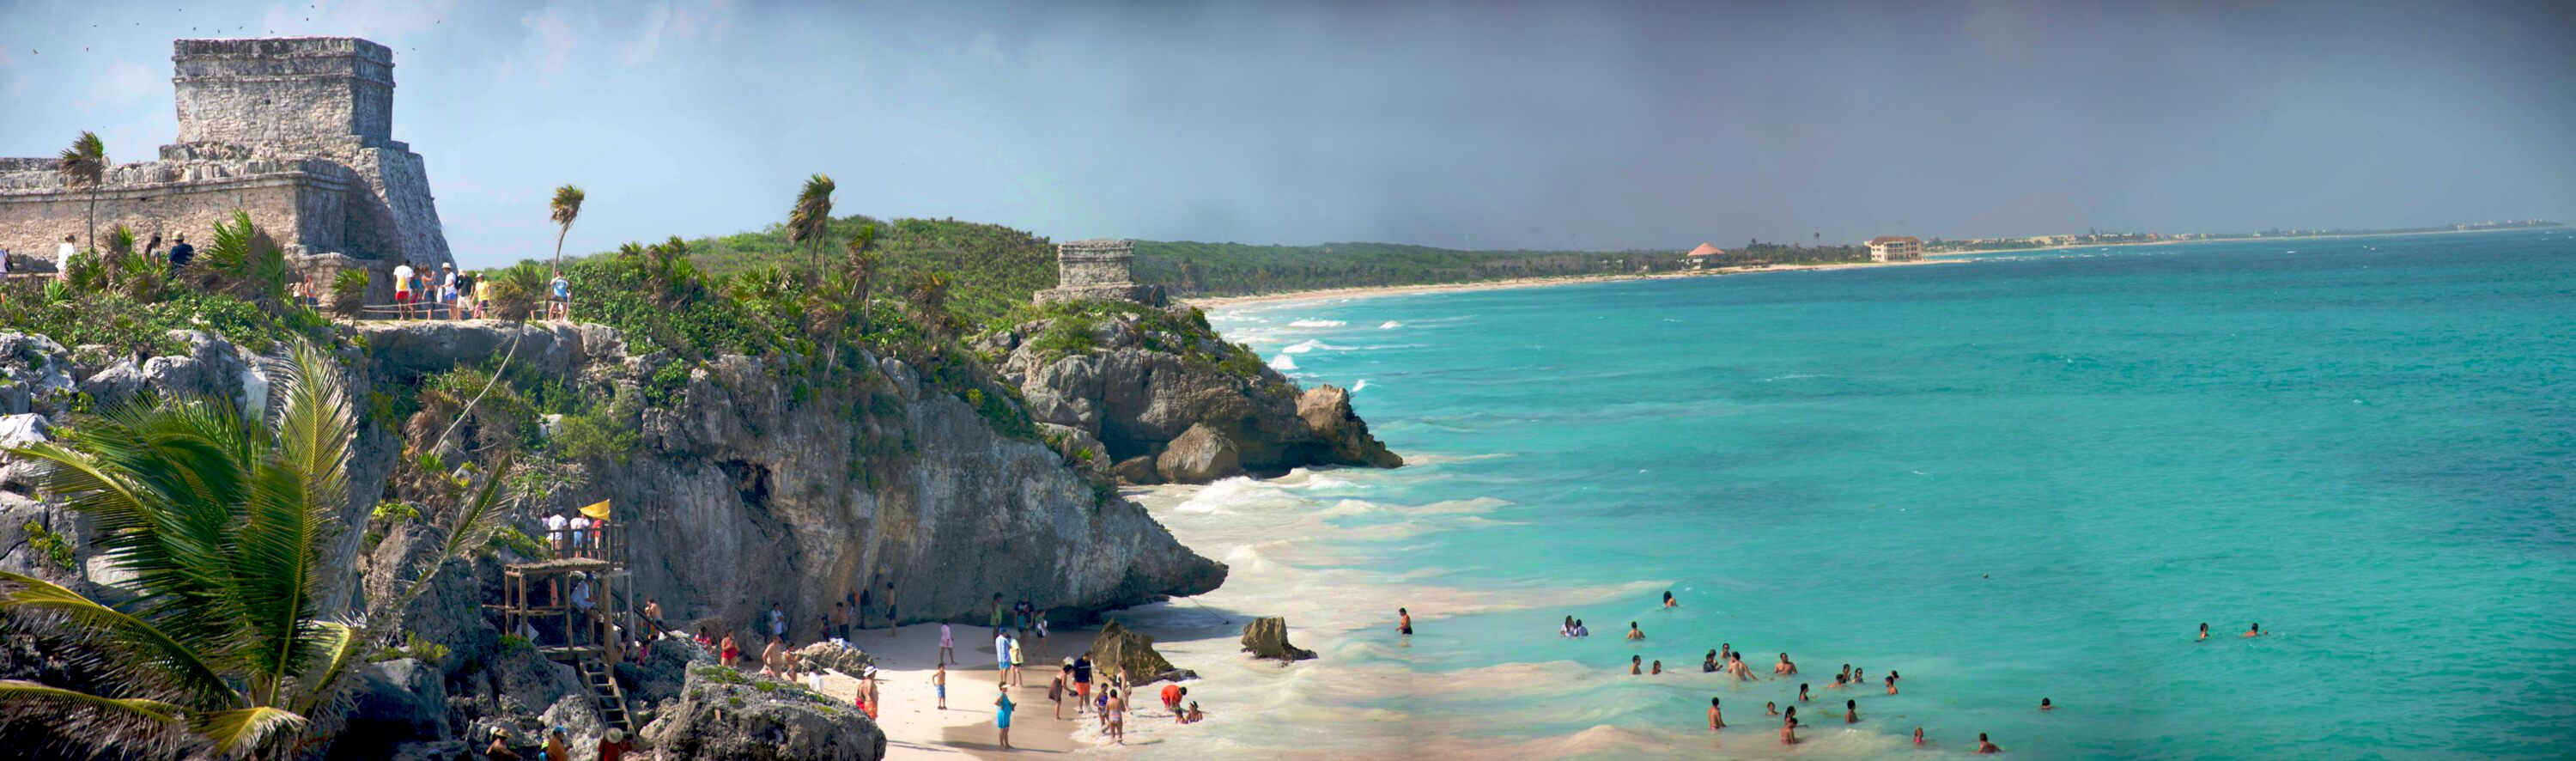 Coronavirus cases in NYC linked to Tulum festival that became superspreader event: report